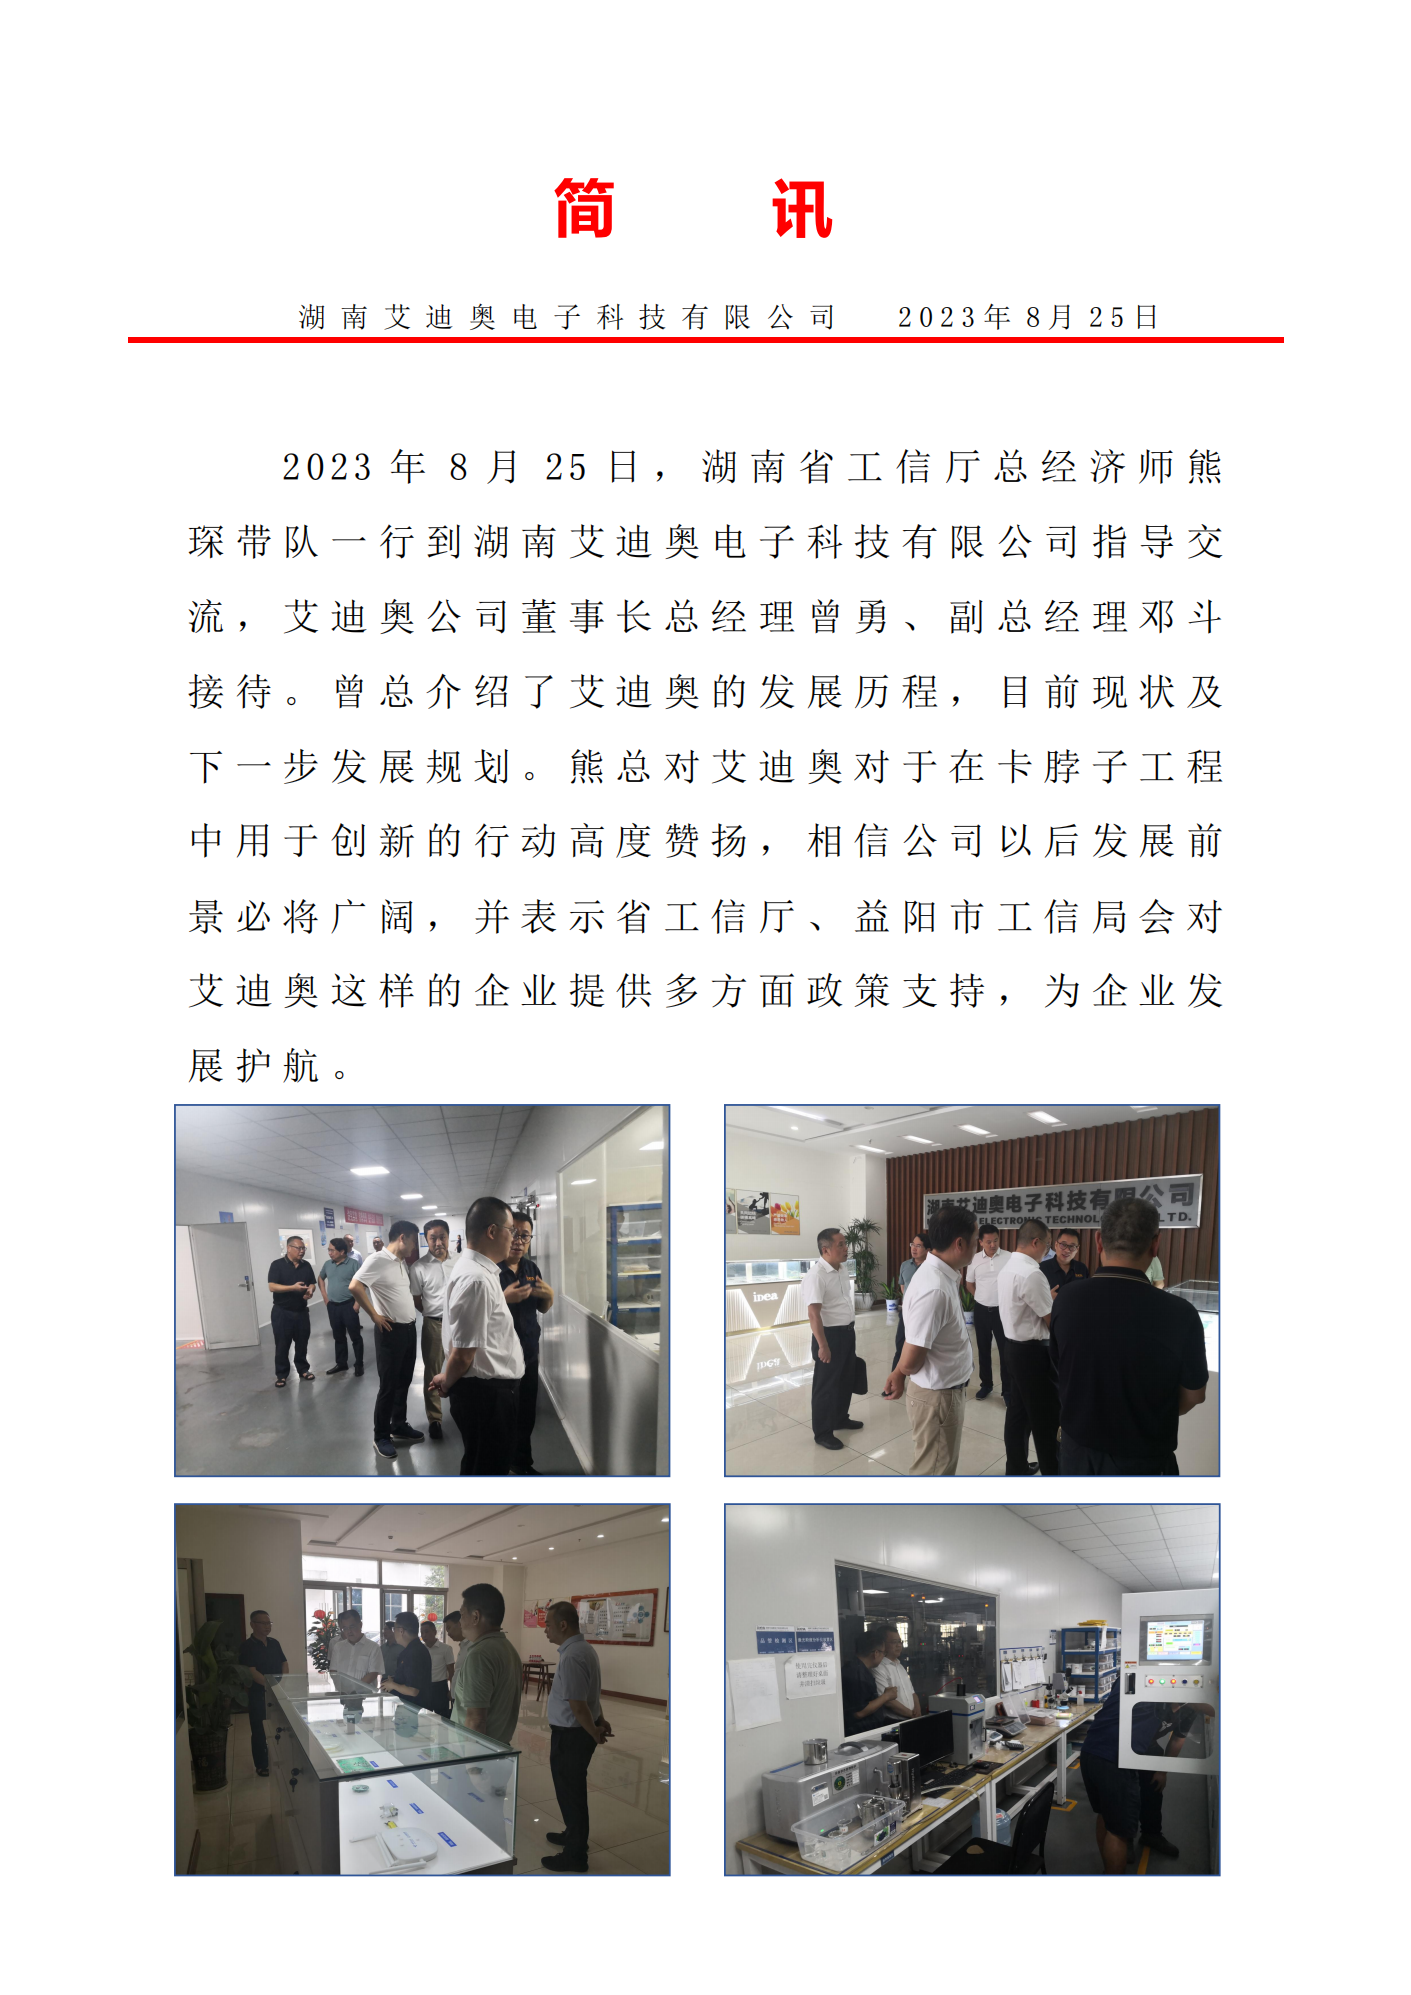 Xiong Chen, chief economist of the provincial department of industry and information technology, and his party visited Hunan adio electronic technology co., ltd for research!